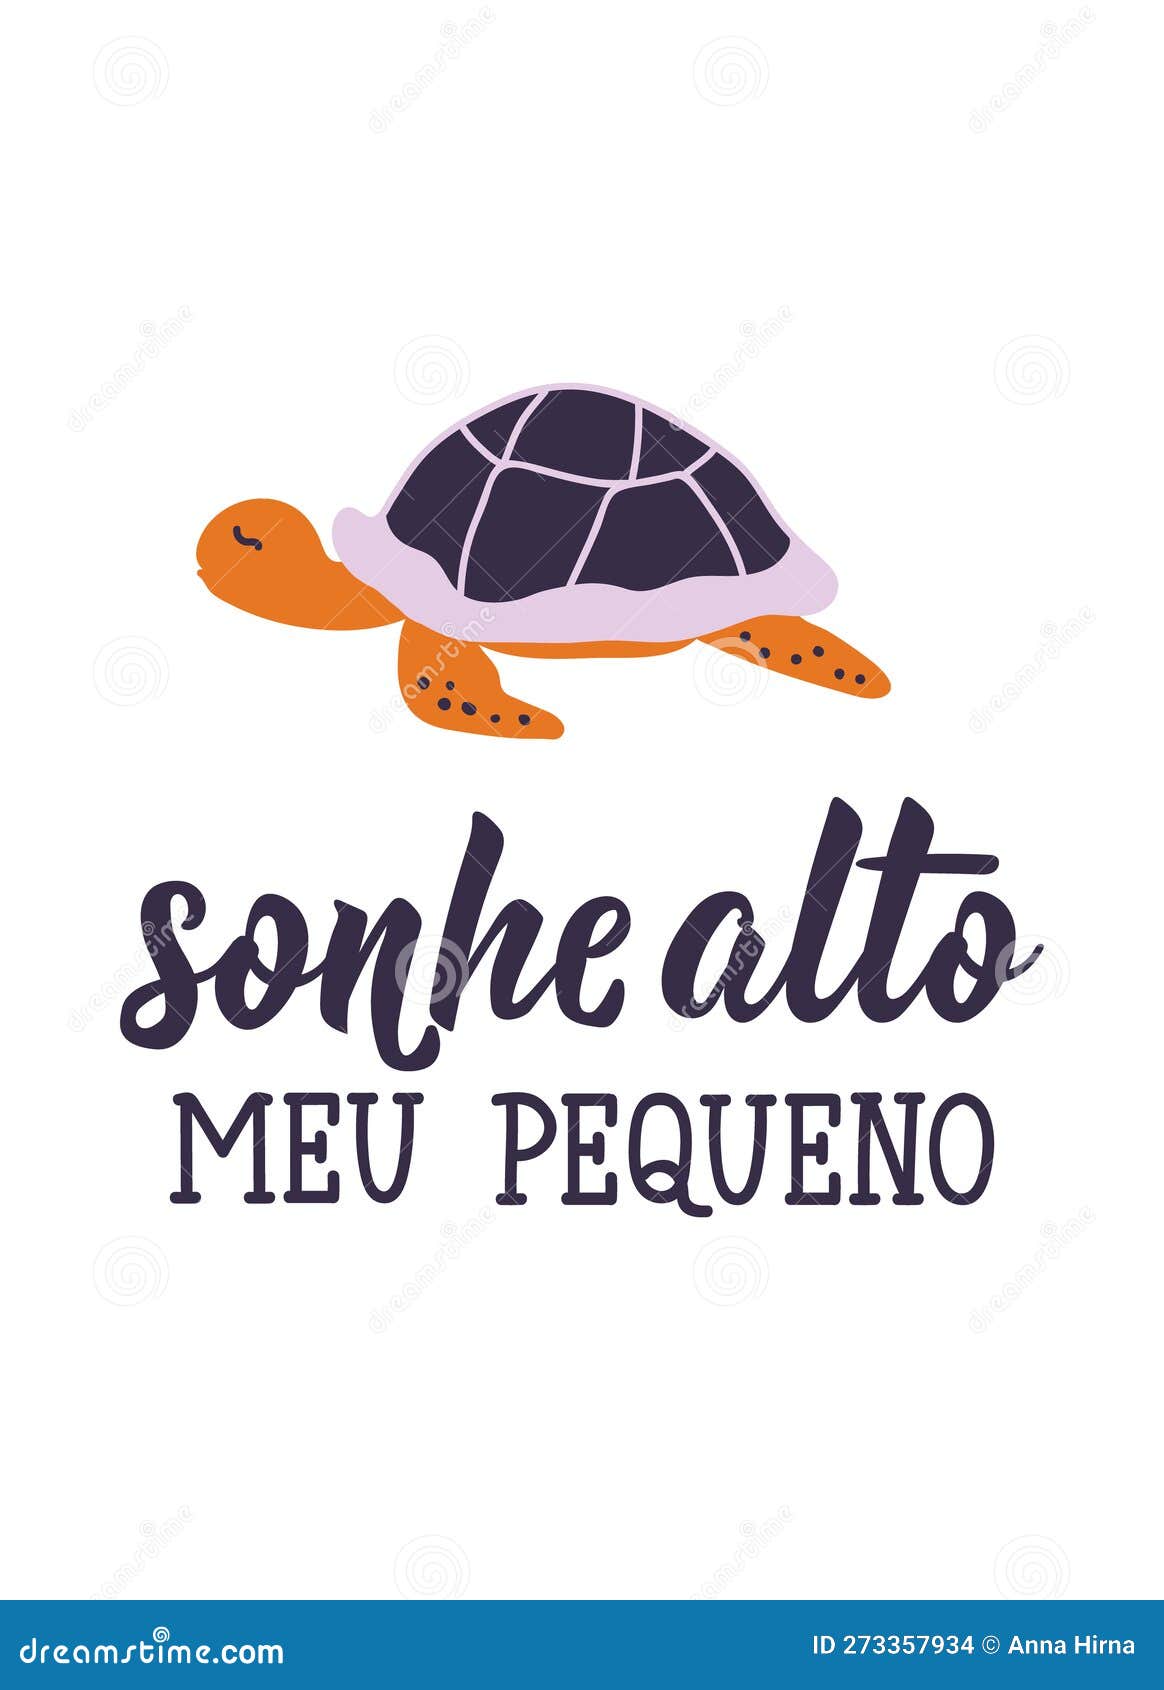 dream big little one in portuguese. ink  with hand-drawn lettering. sonhe alto meu pequeno